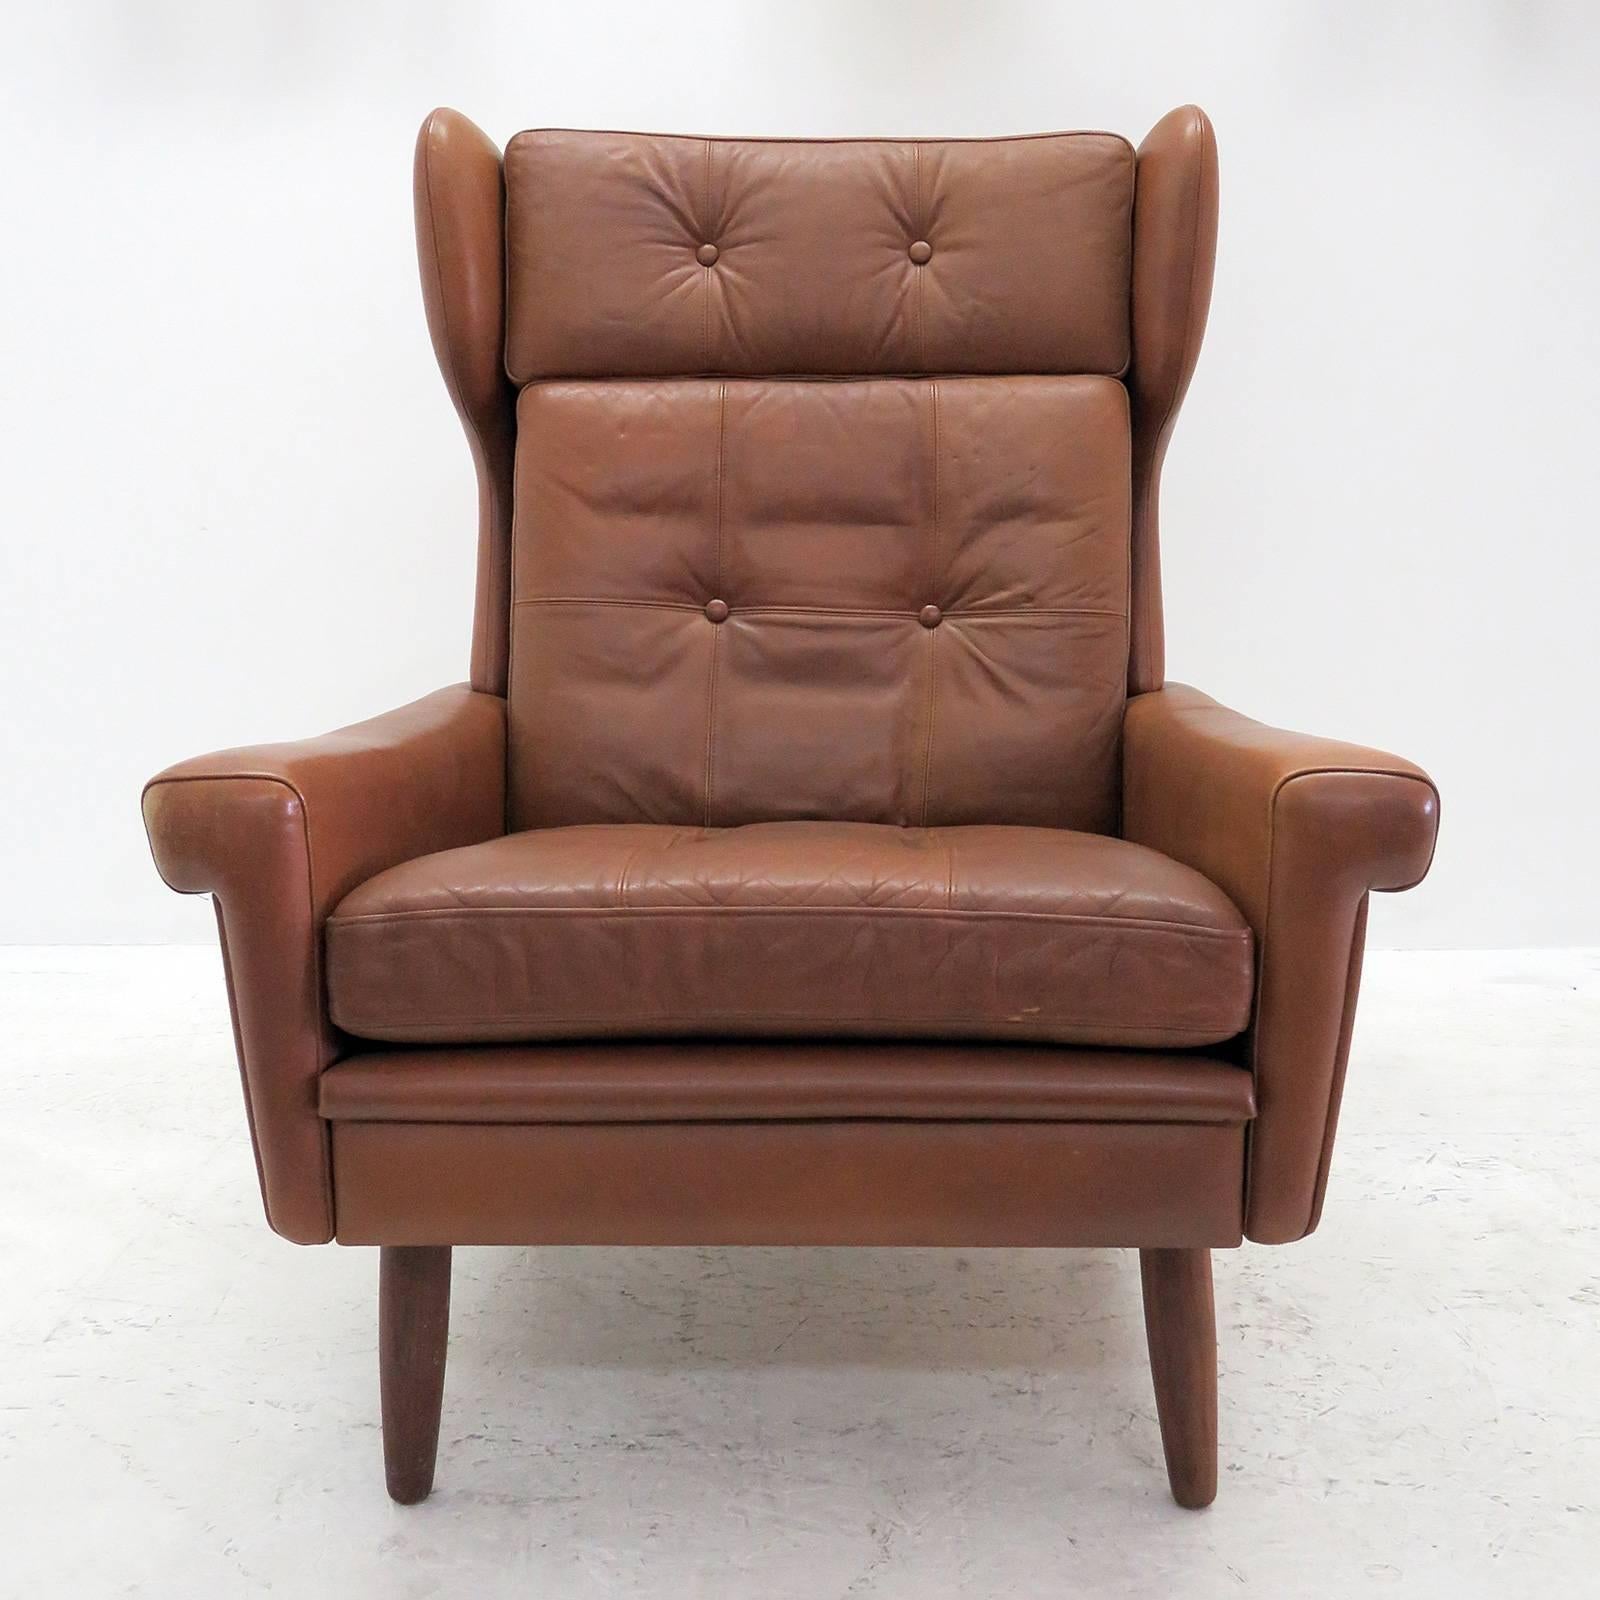 Wonderful high back winged leather lounge chair by Svend Skipper, with loose cushions upholstered in buttoned cognac colored leather with stained beech legs.